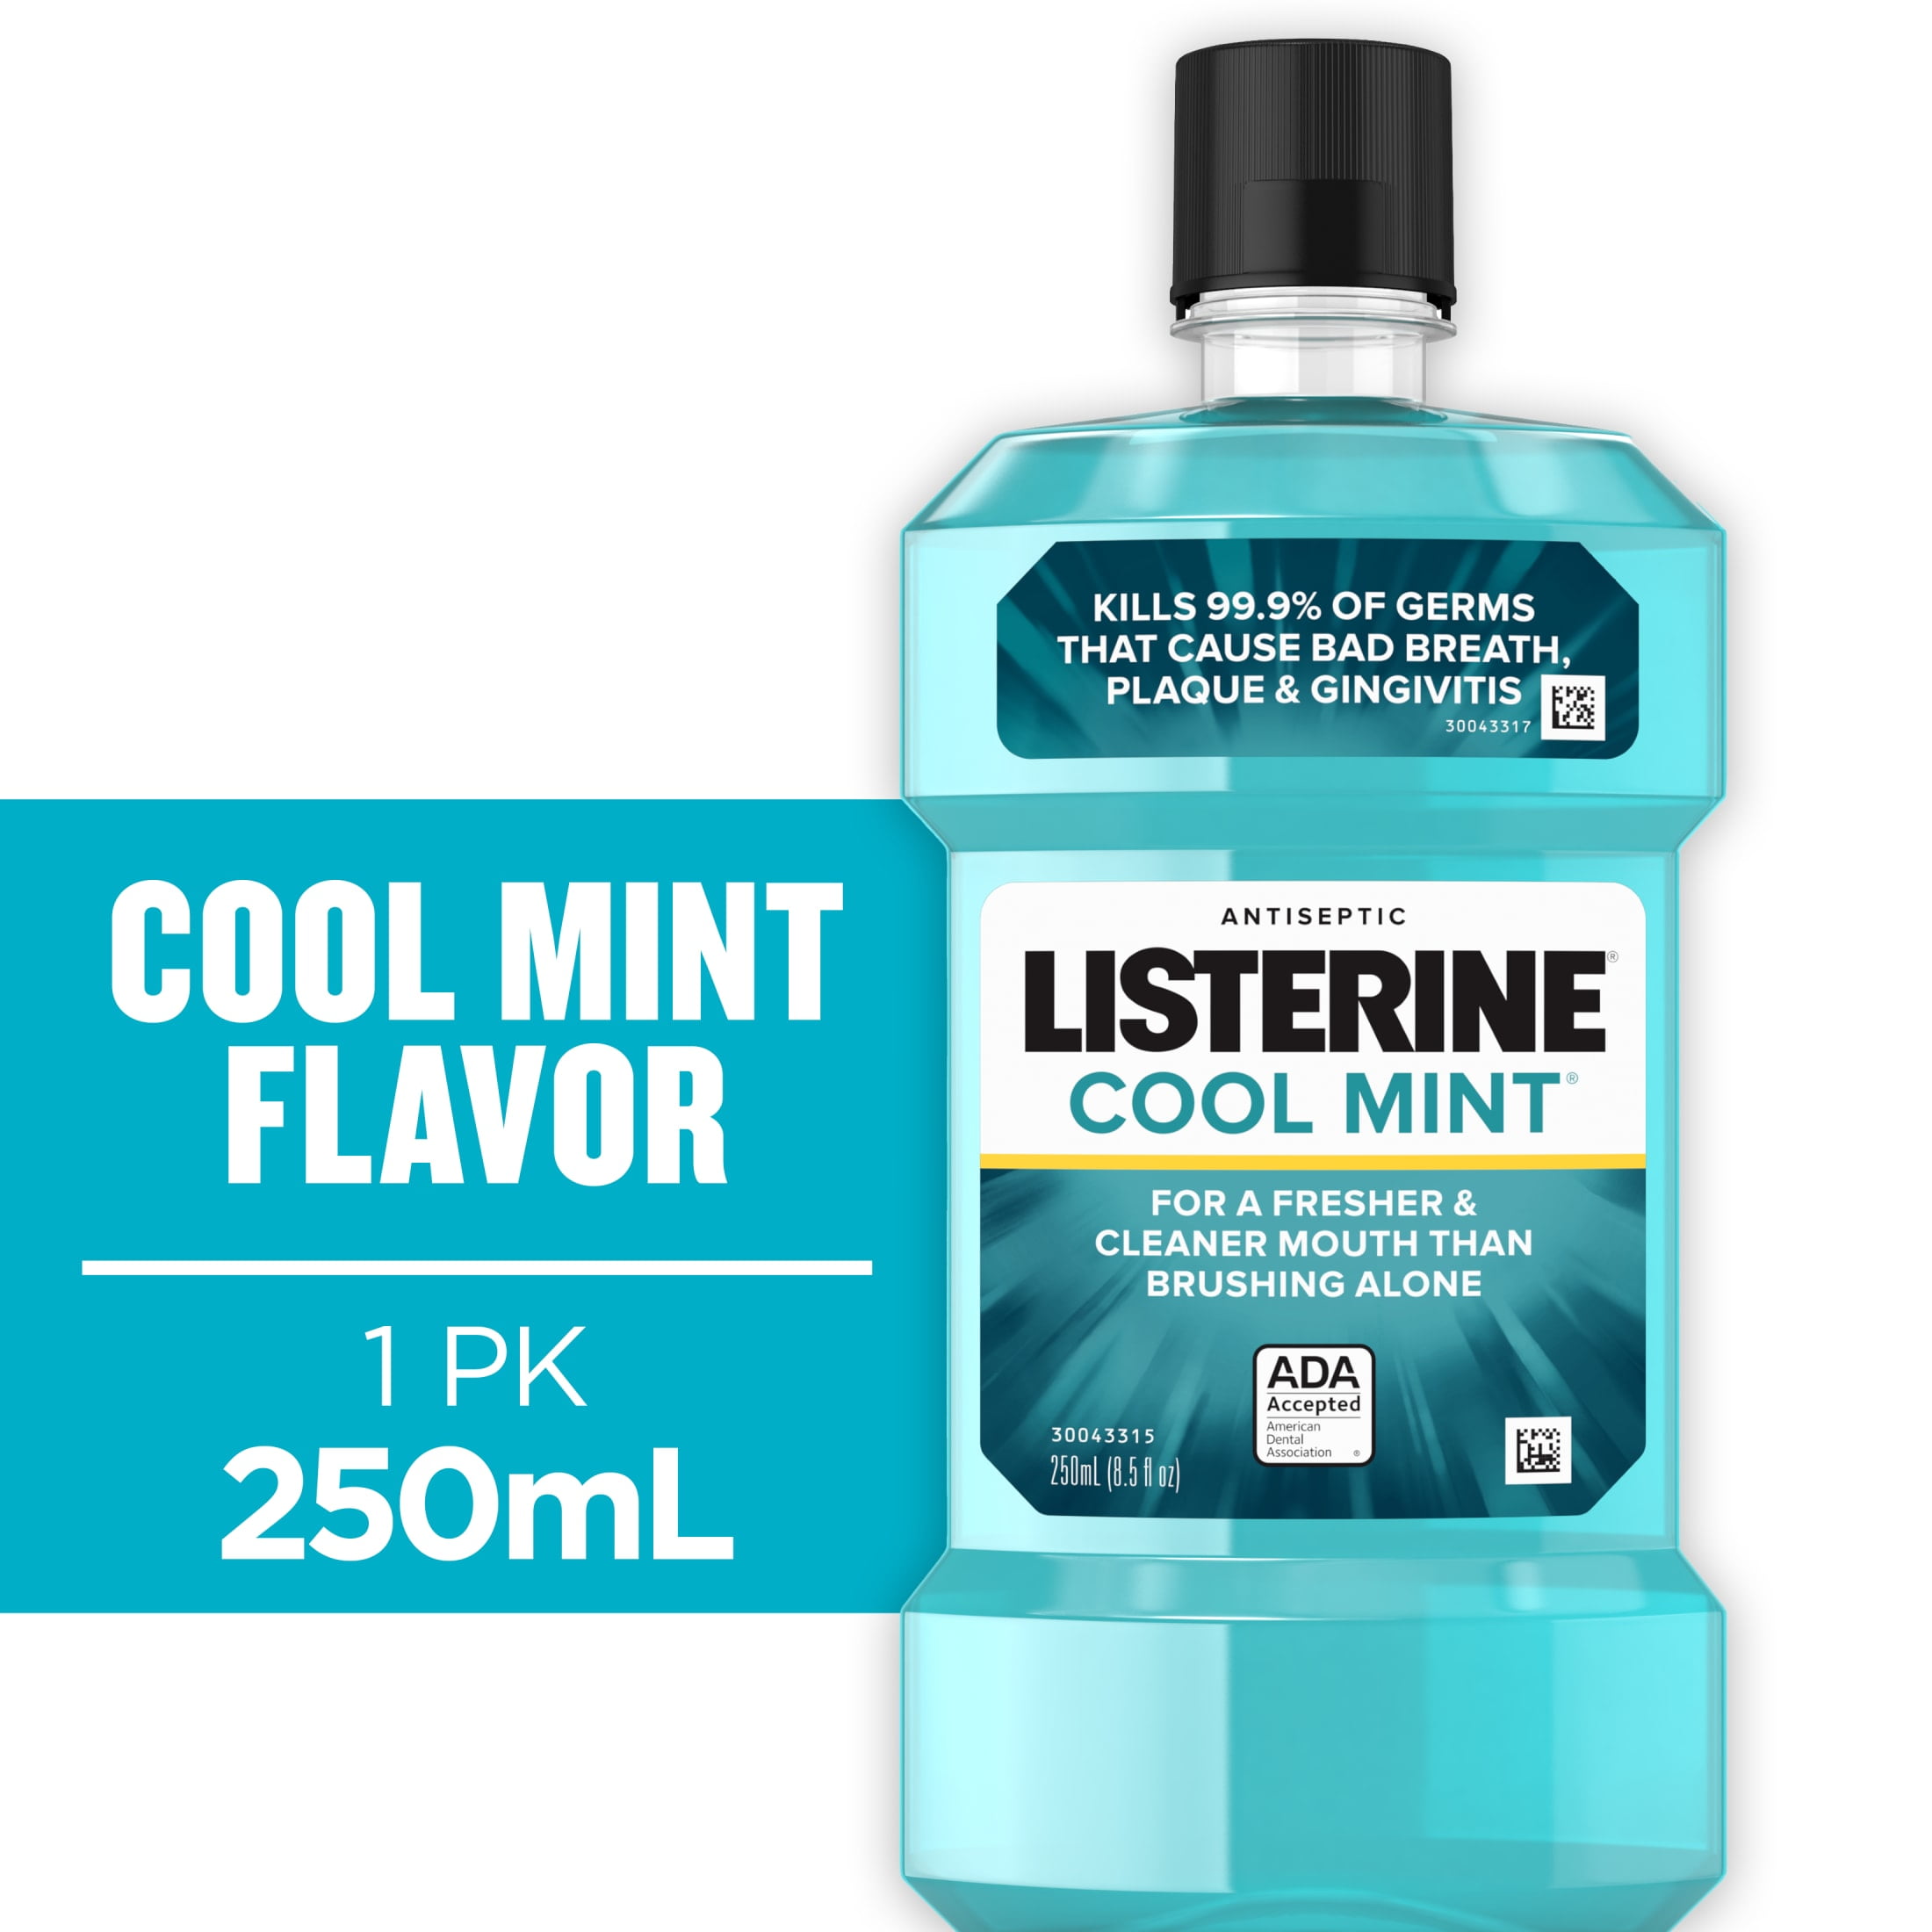 Listerine Cool Mint Antiseptic Mouthwash For Bad Breath 250 Ml